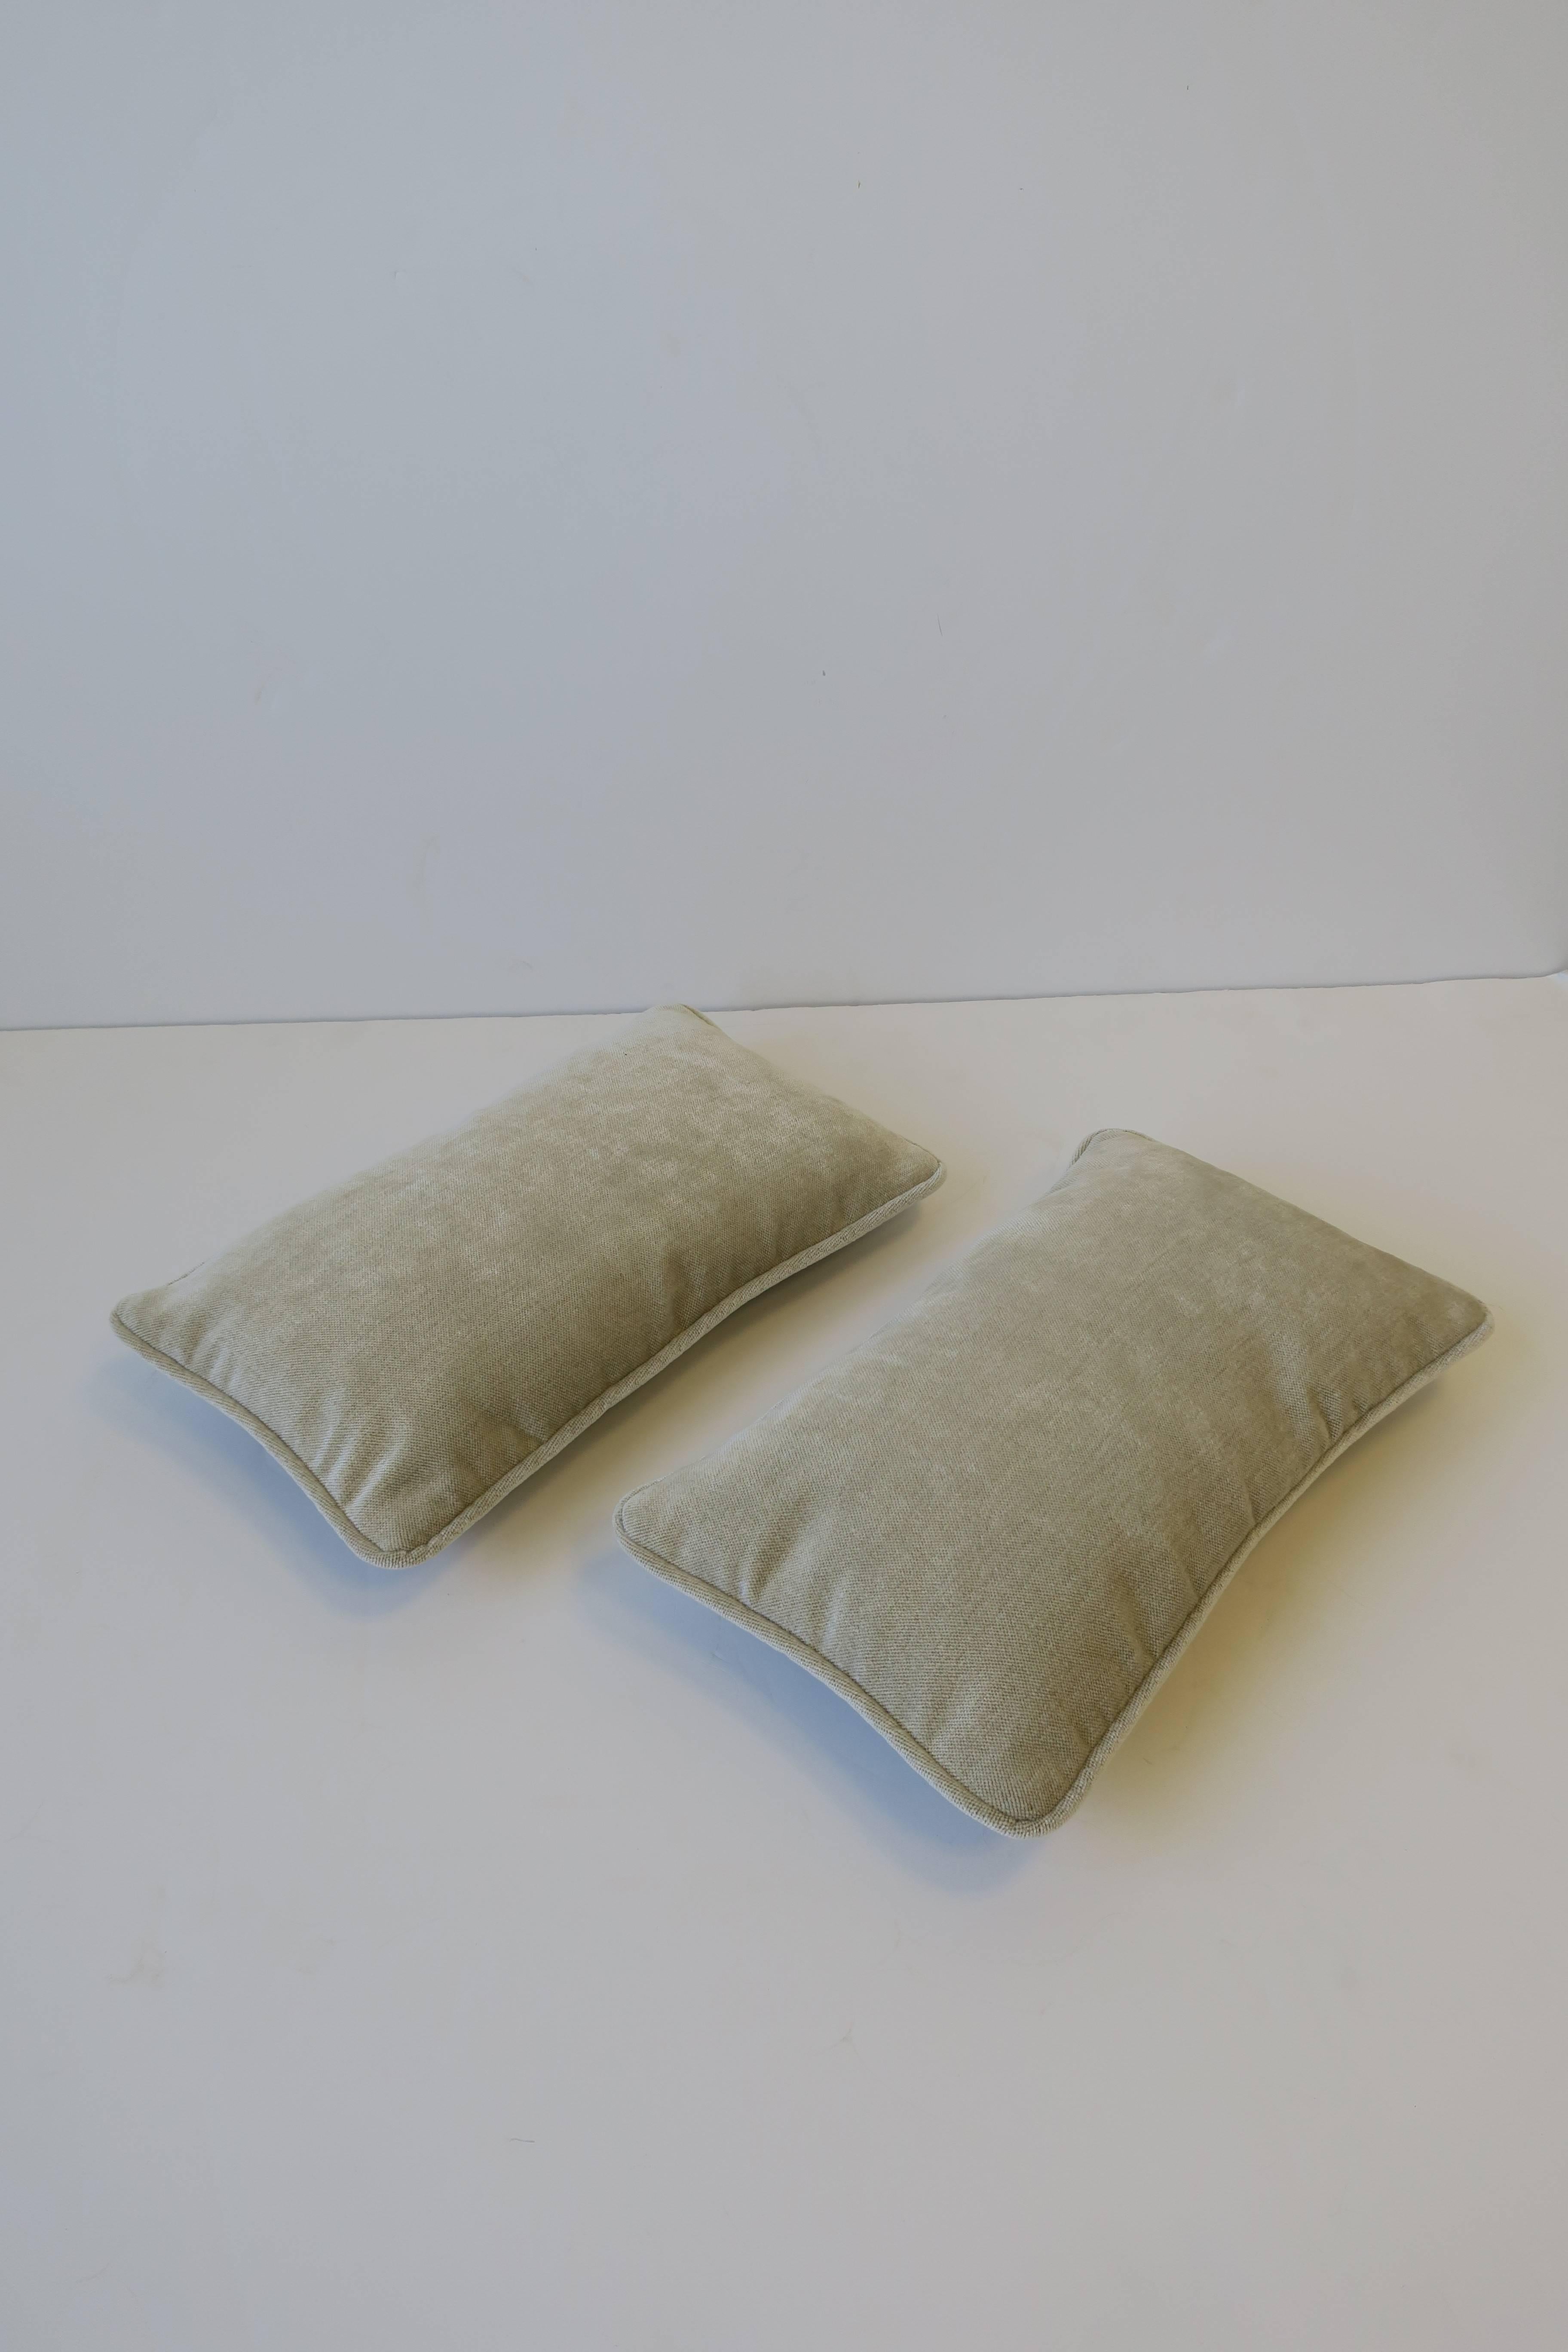 American Pair of Small Throw or Accent Pillows in Champagne